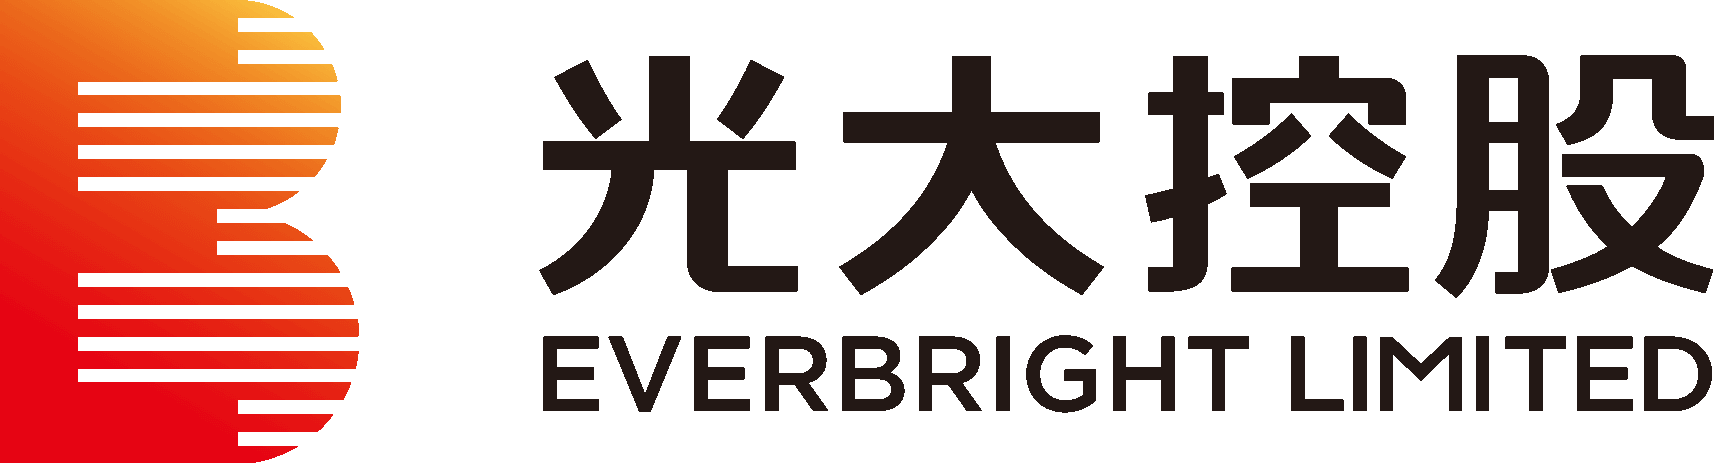 Everbright Investments